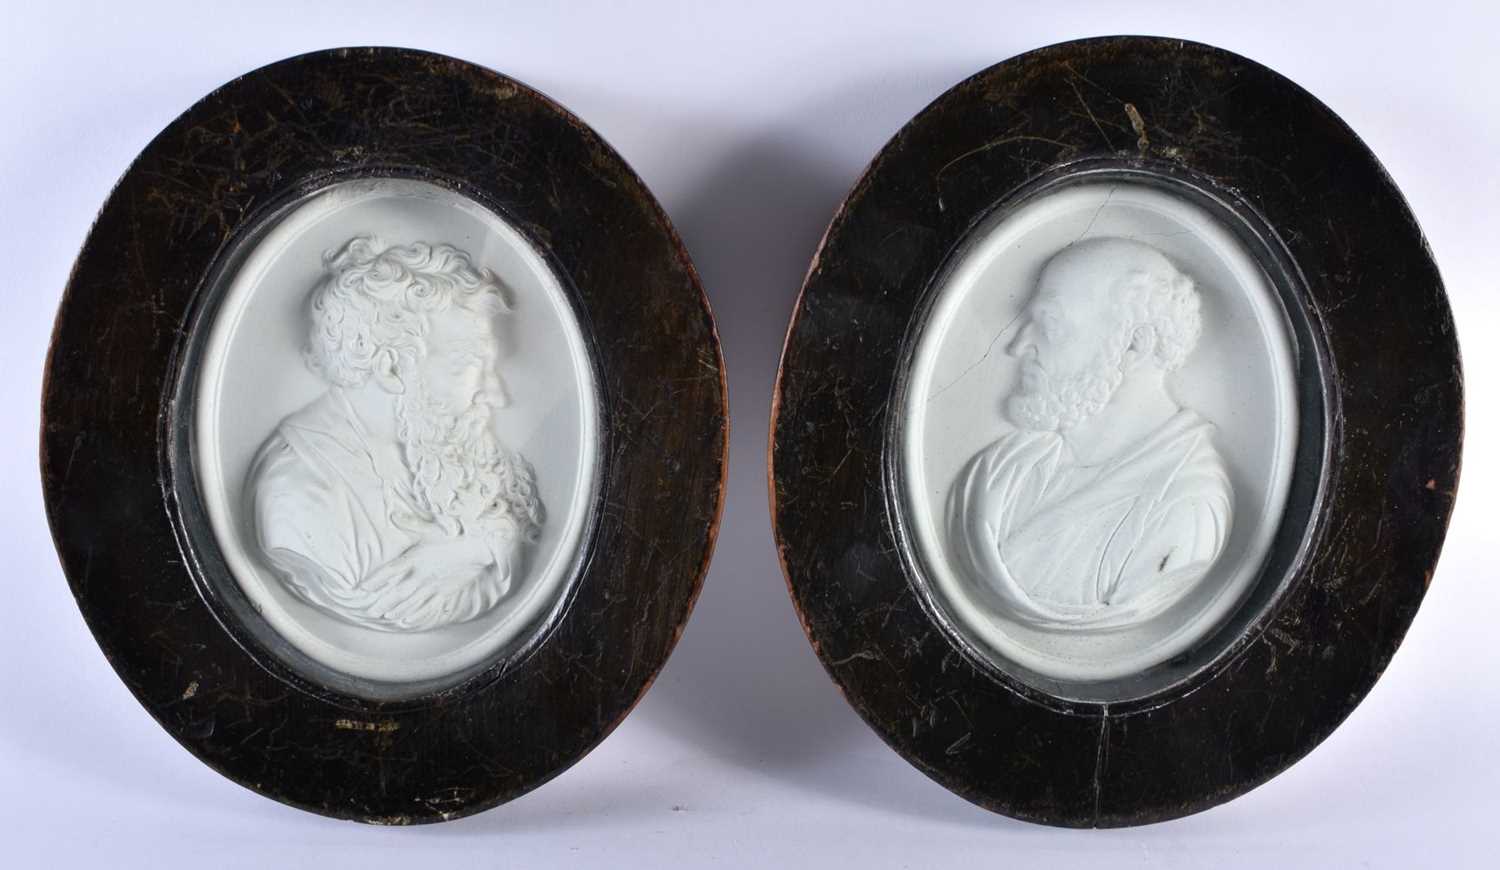 A PAIR OF 19TH CENTURY EUROPEAN GRAND TOUR PLASTER PLAQUES within ebonised frames. 23 cm x 18 cm.